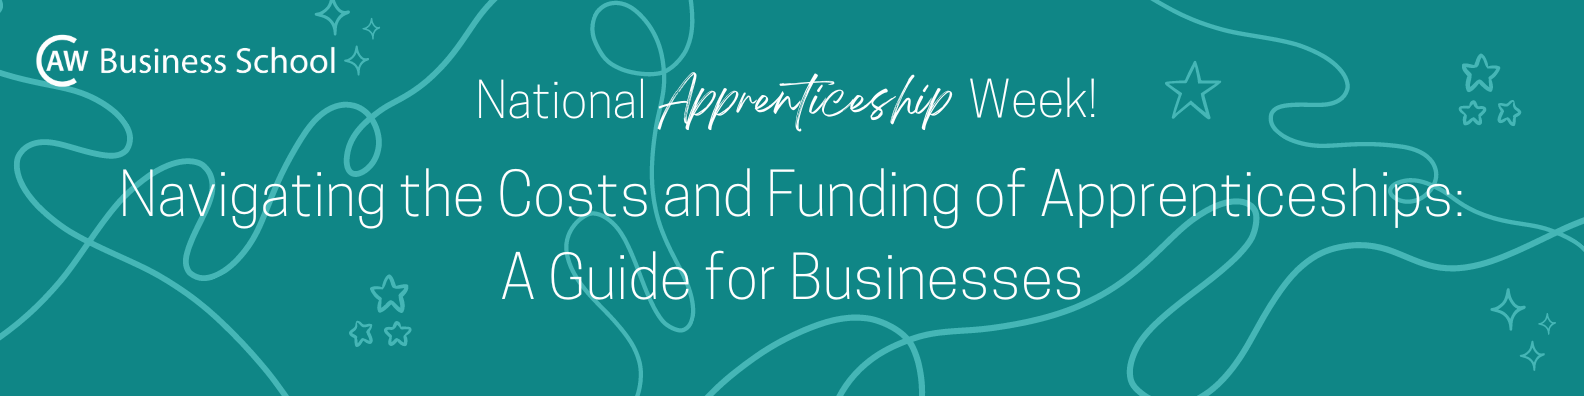 Navigating the Costs and Funding of Apprenticeships: A Guide for Businesses